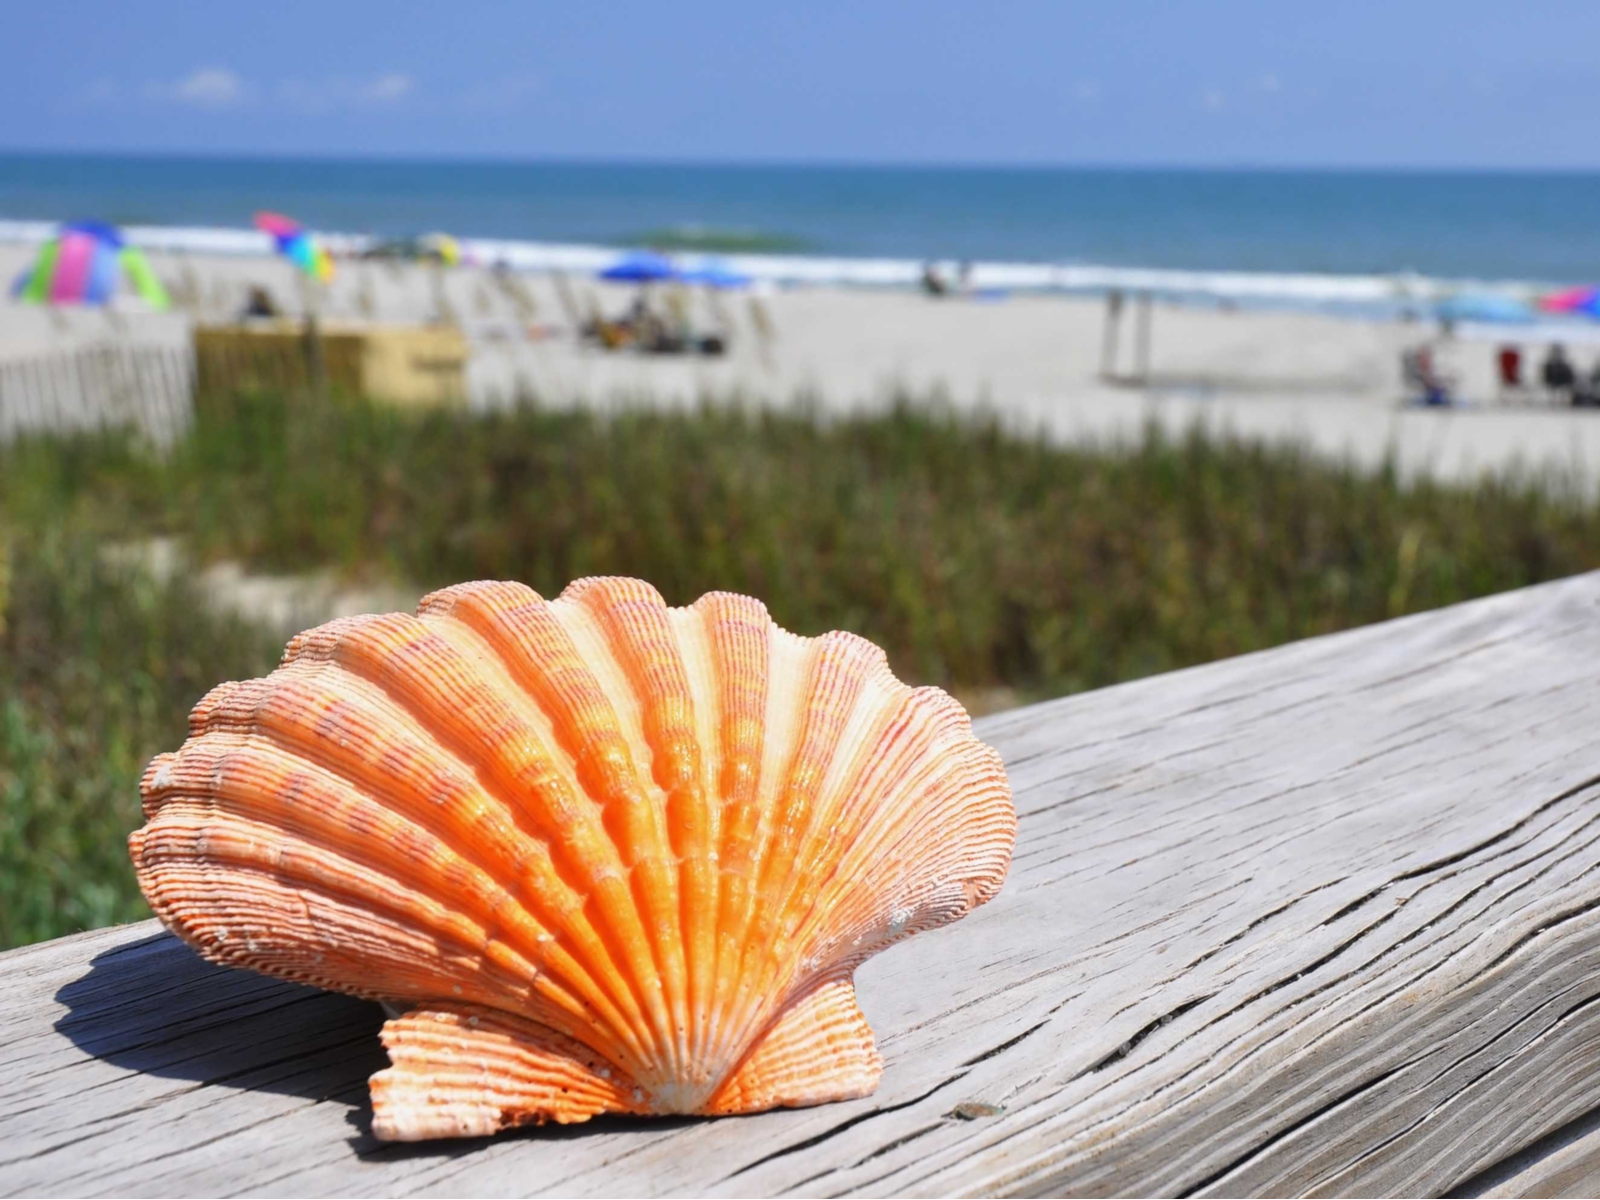 Pretty pink scallop shell in the ocean with the beach in the background